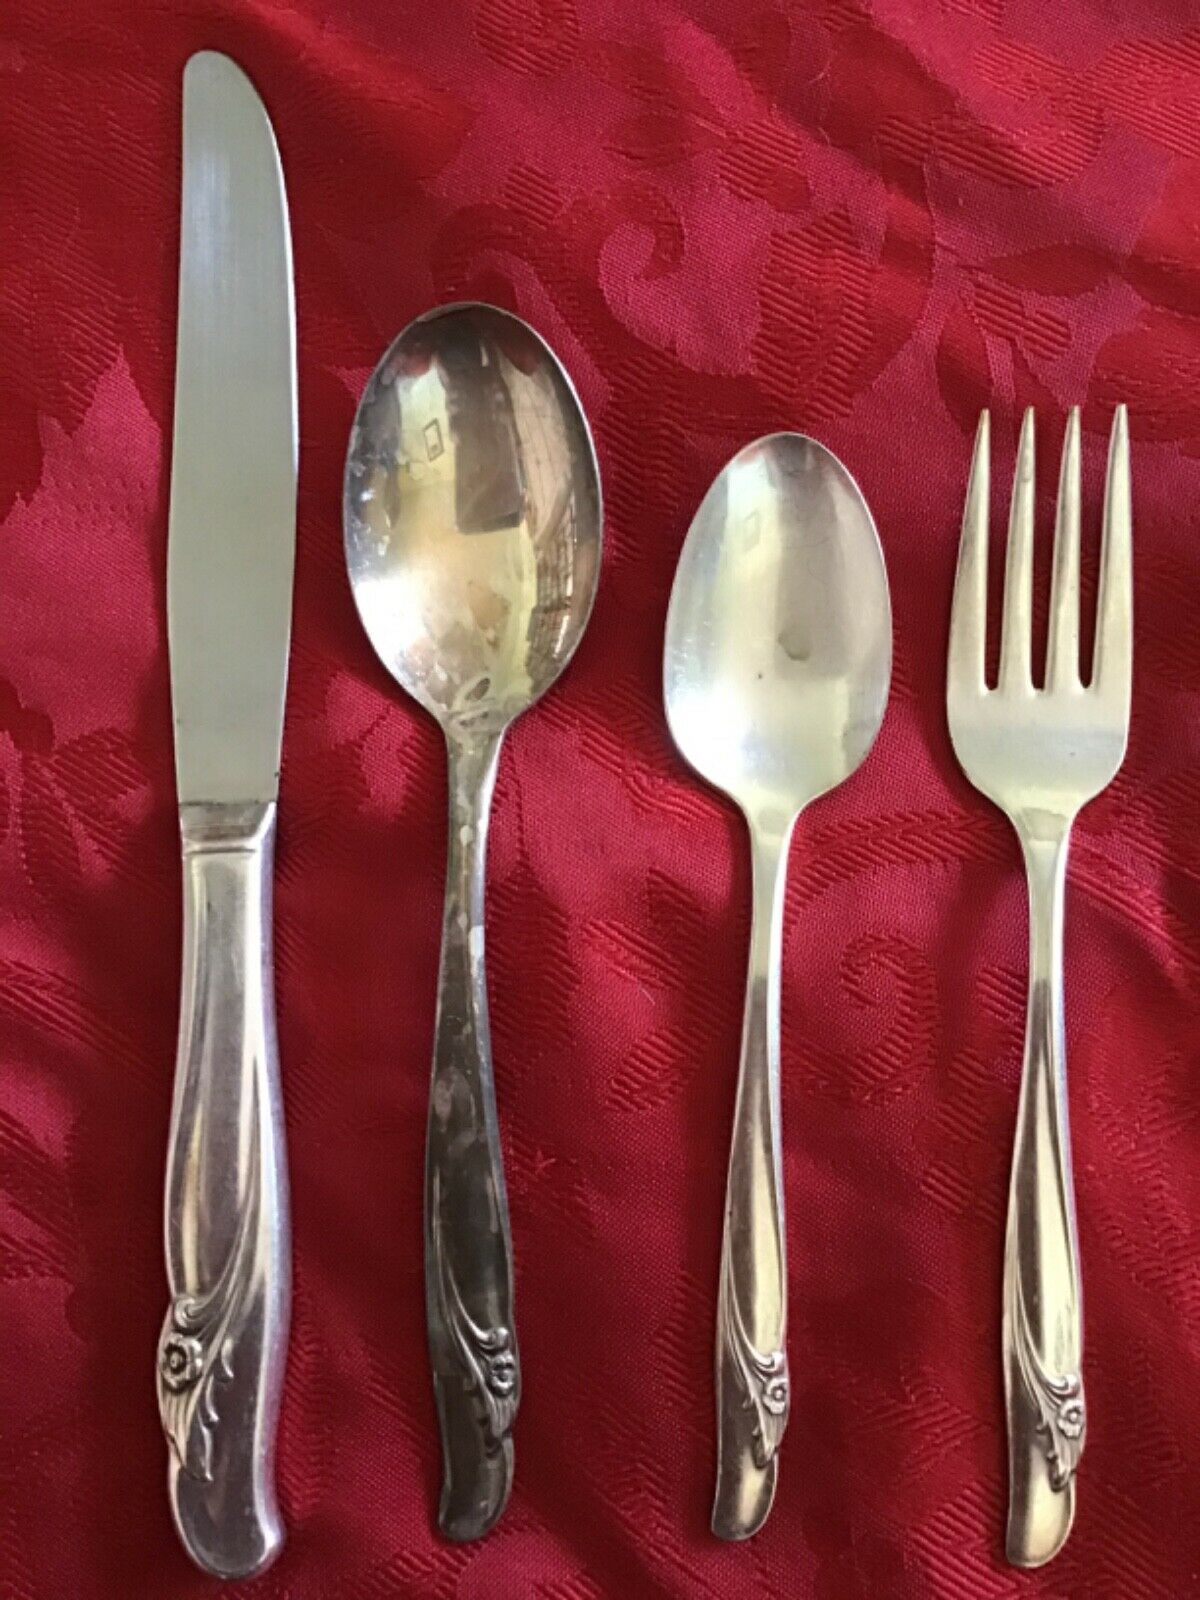 Rogers & Bro Silverplate - Exquisite Pattern - 4 Pc Lot